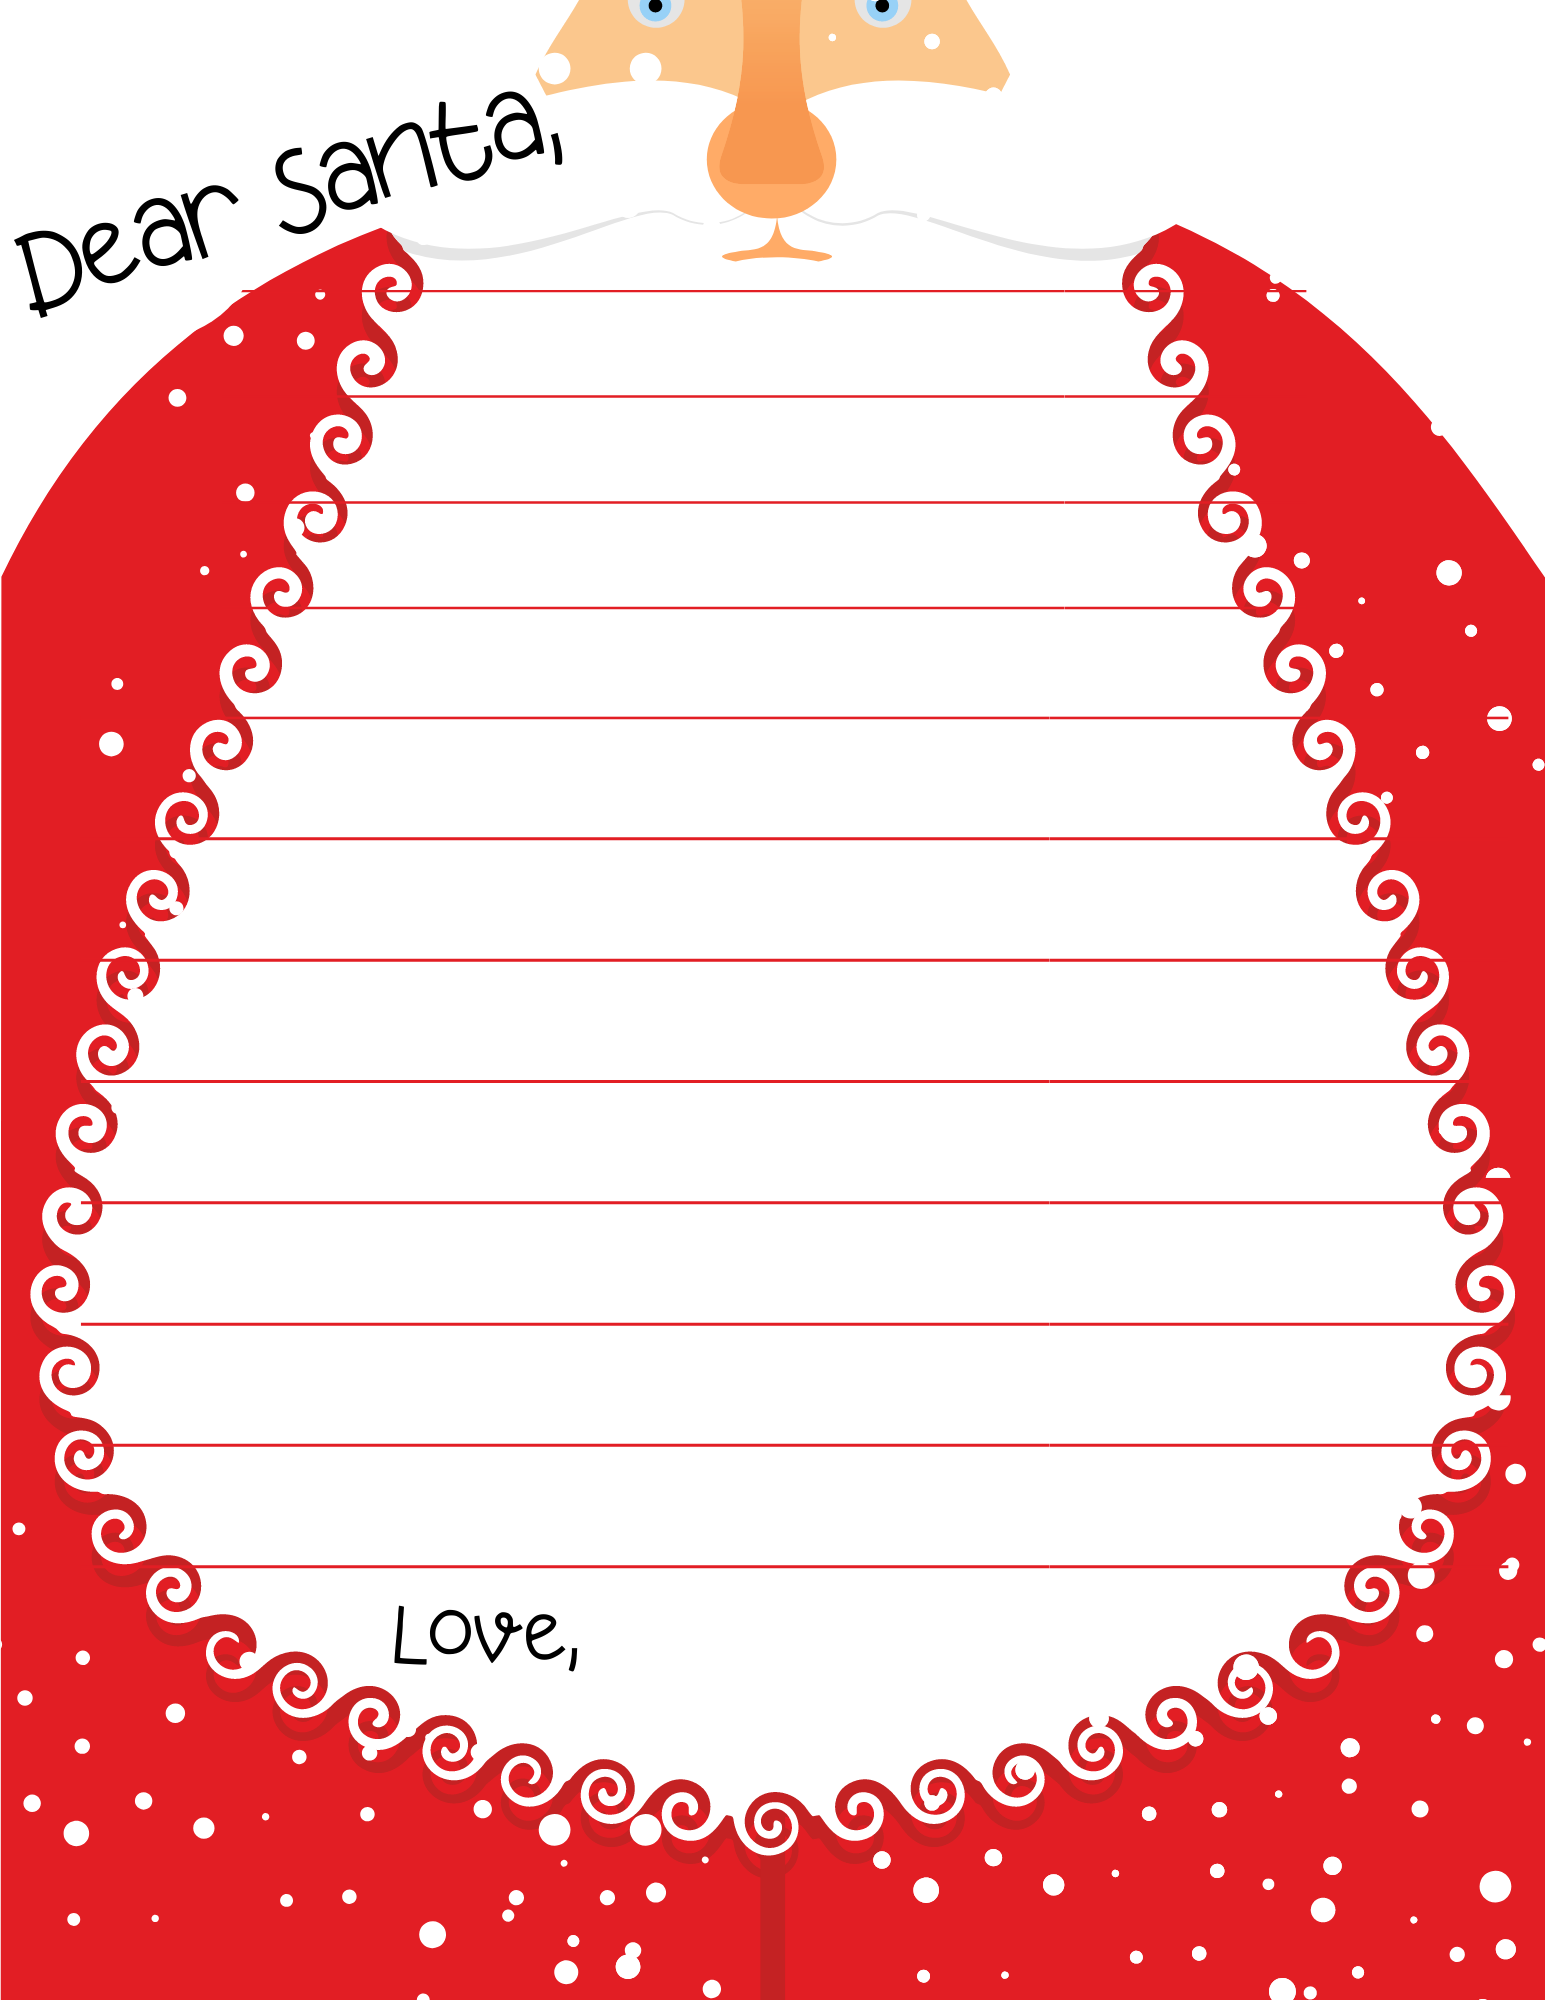 free printable santa letters are a great way to make the season extra special